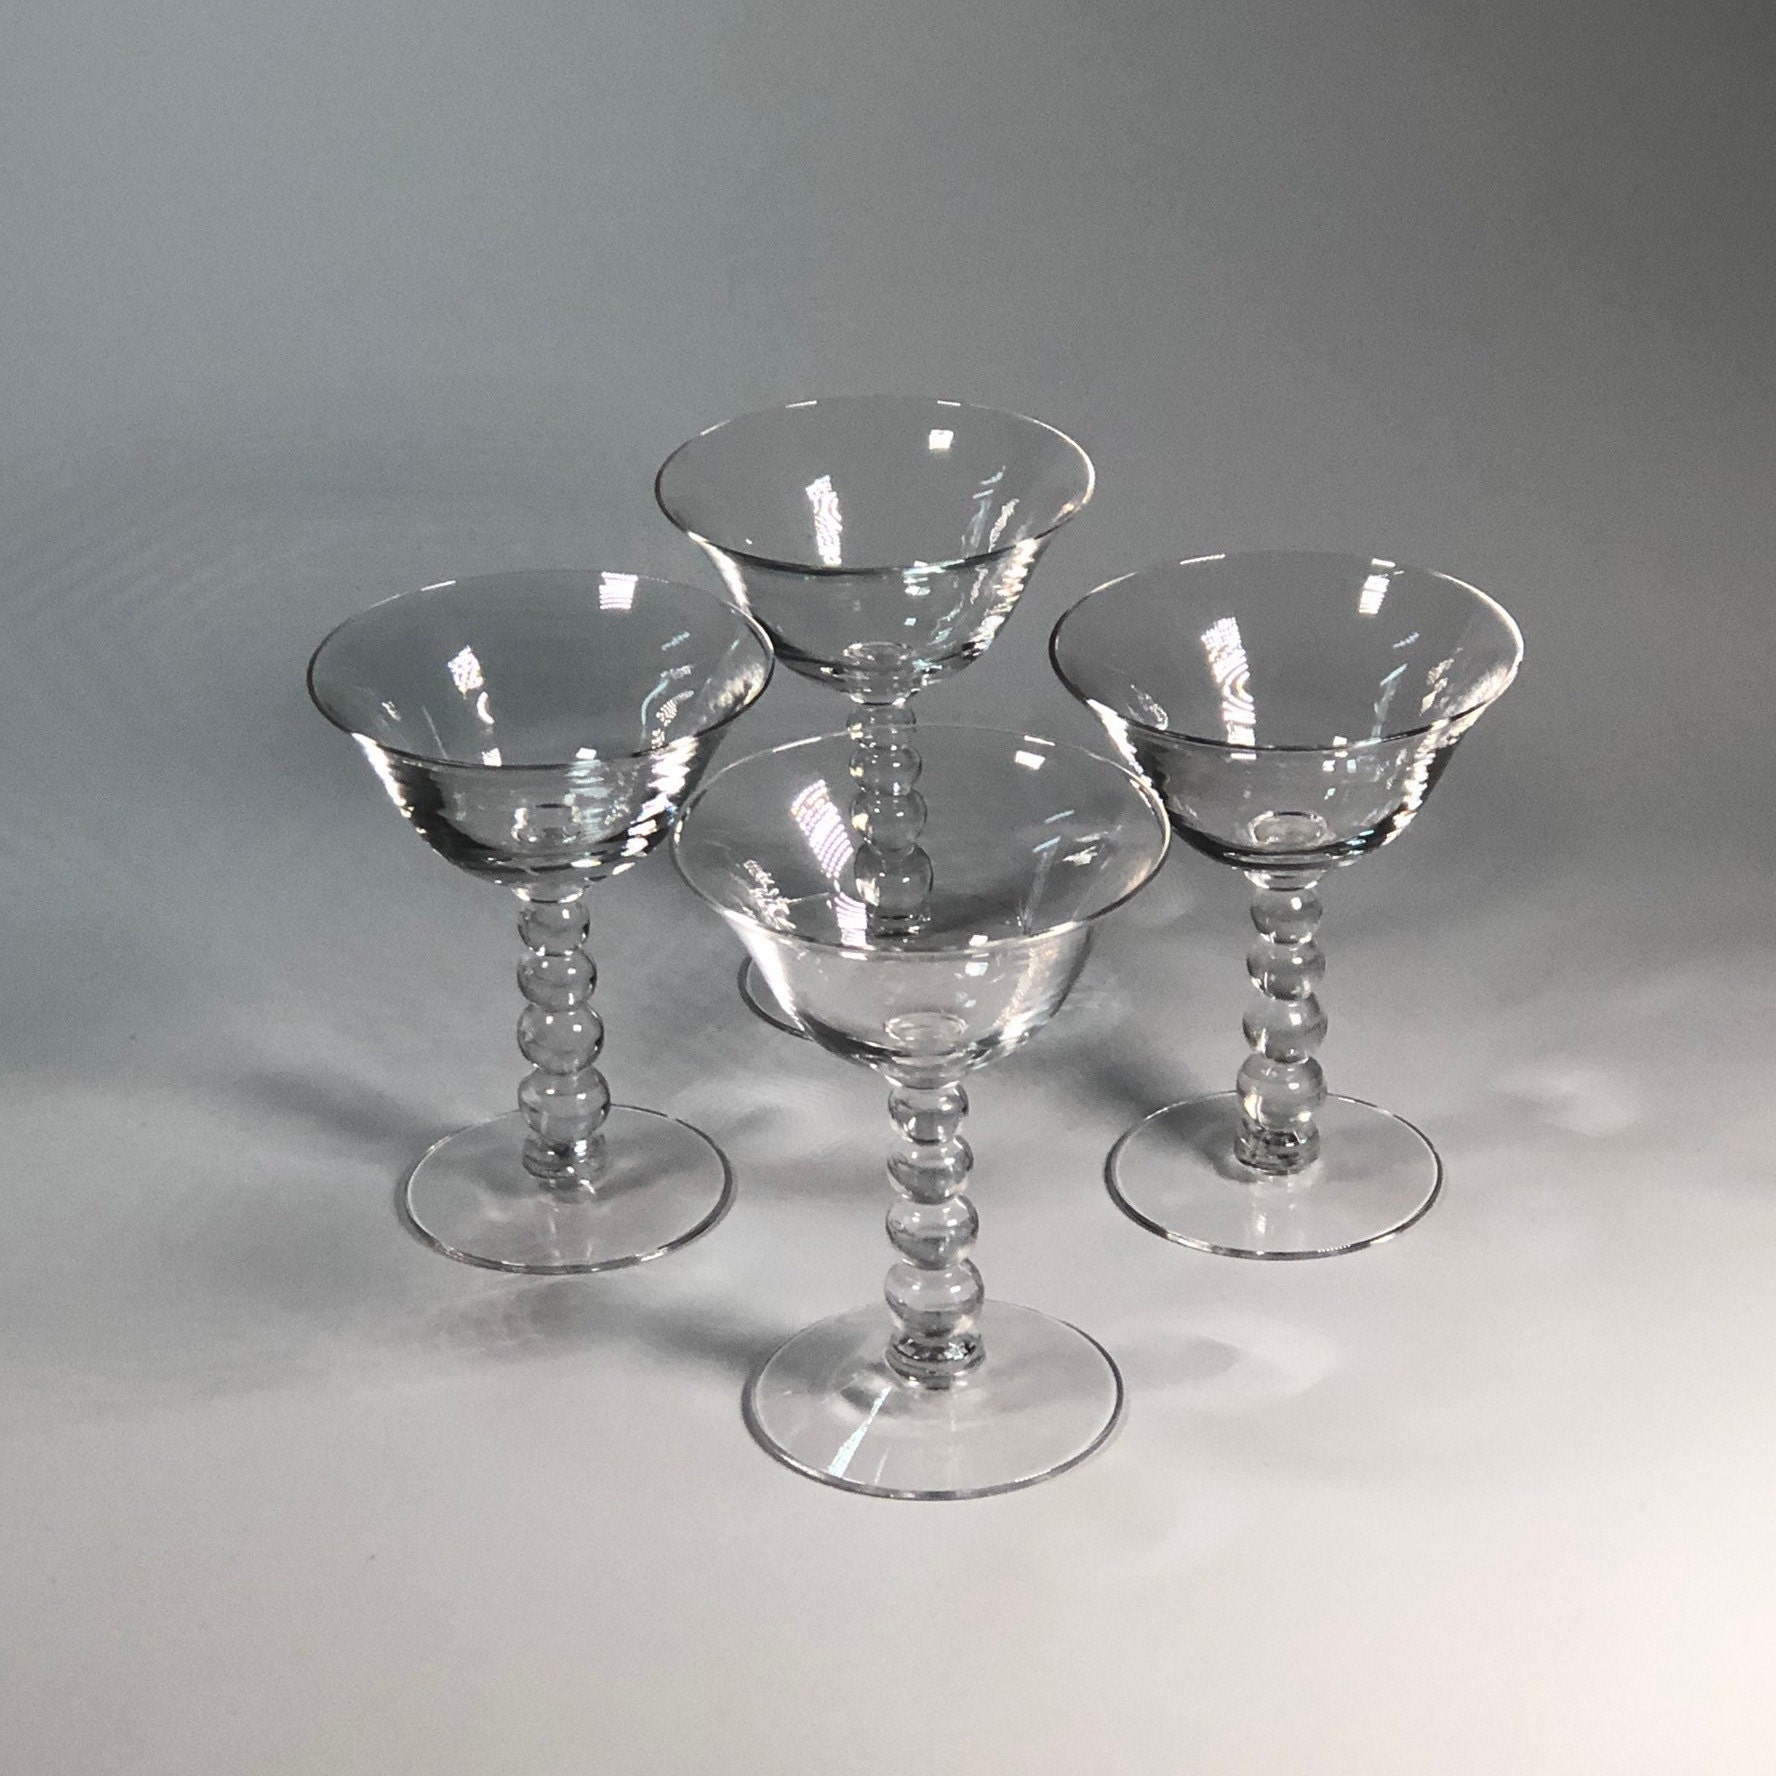 4 Vintage Cocktail Glasses, Candlewick, circa 1950's, 4 oz After